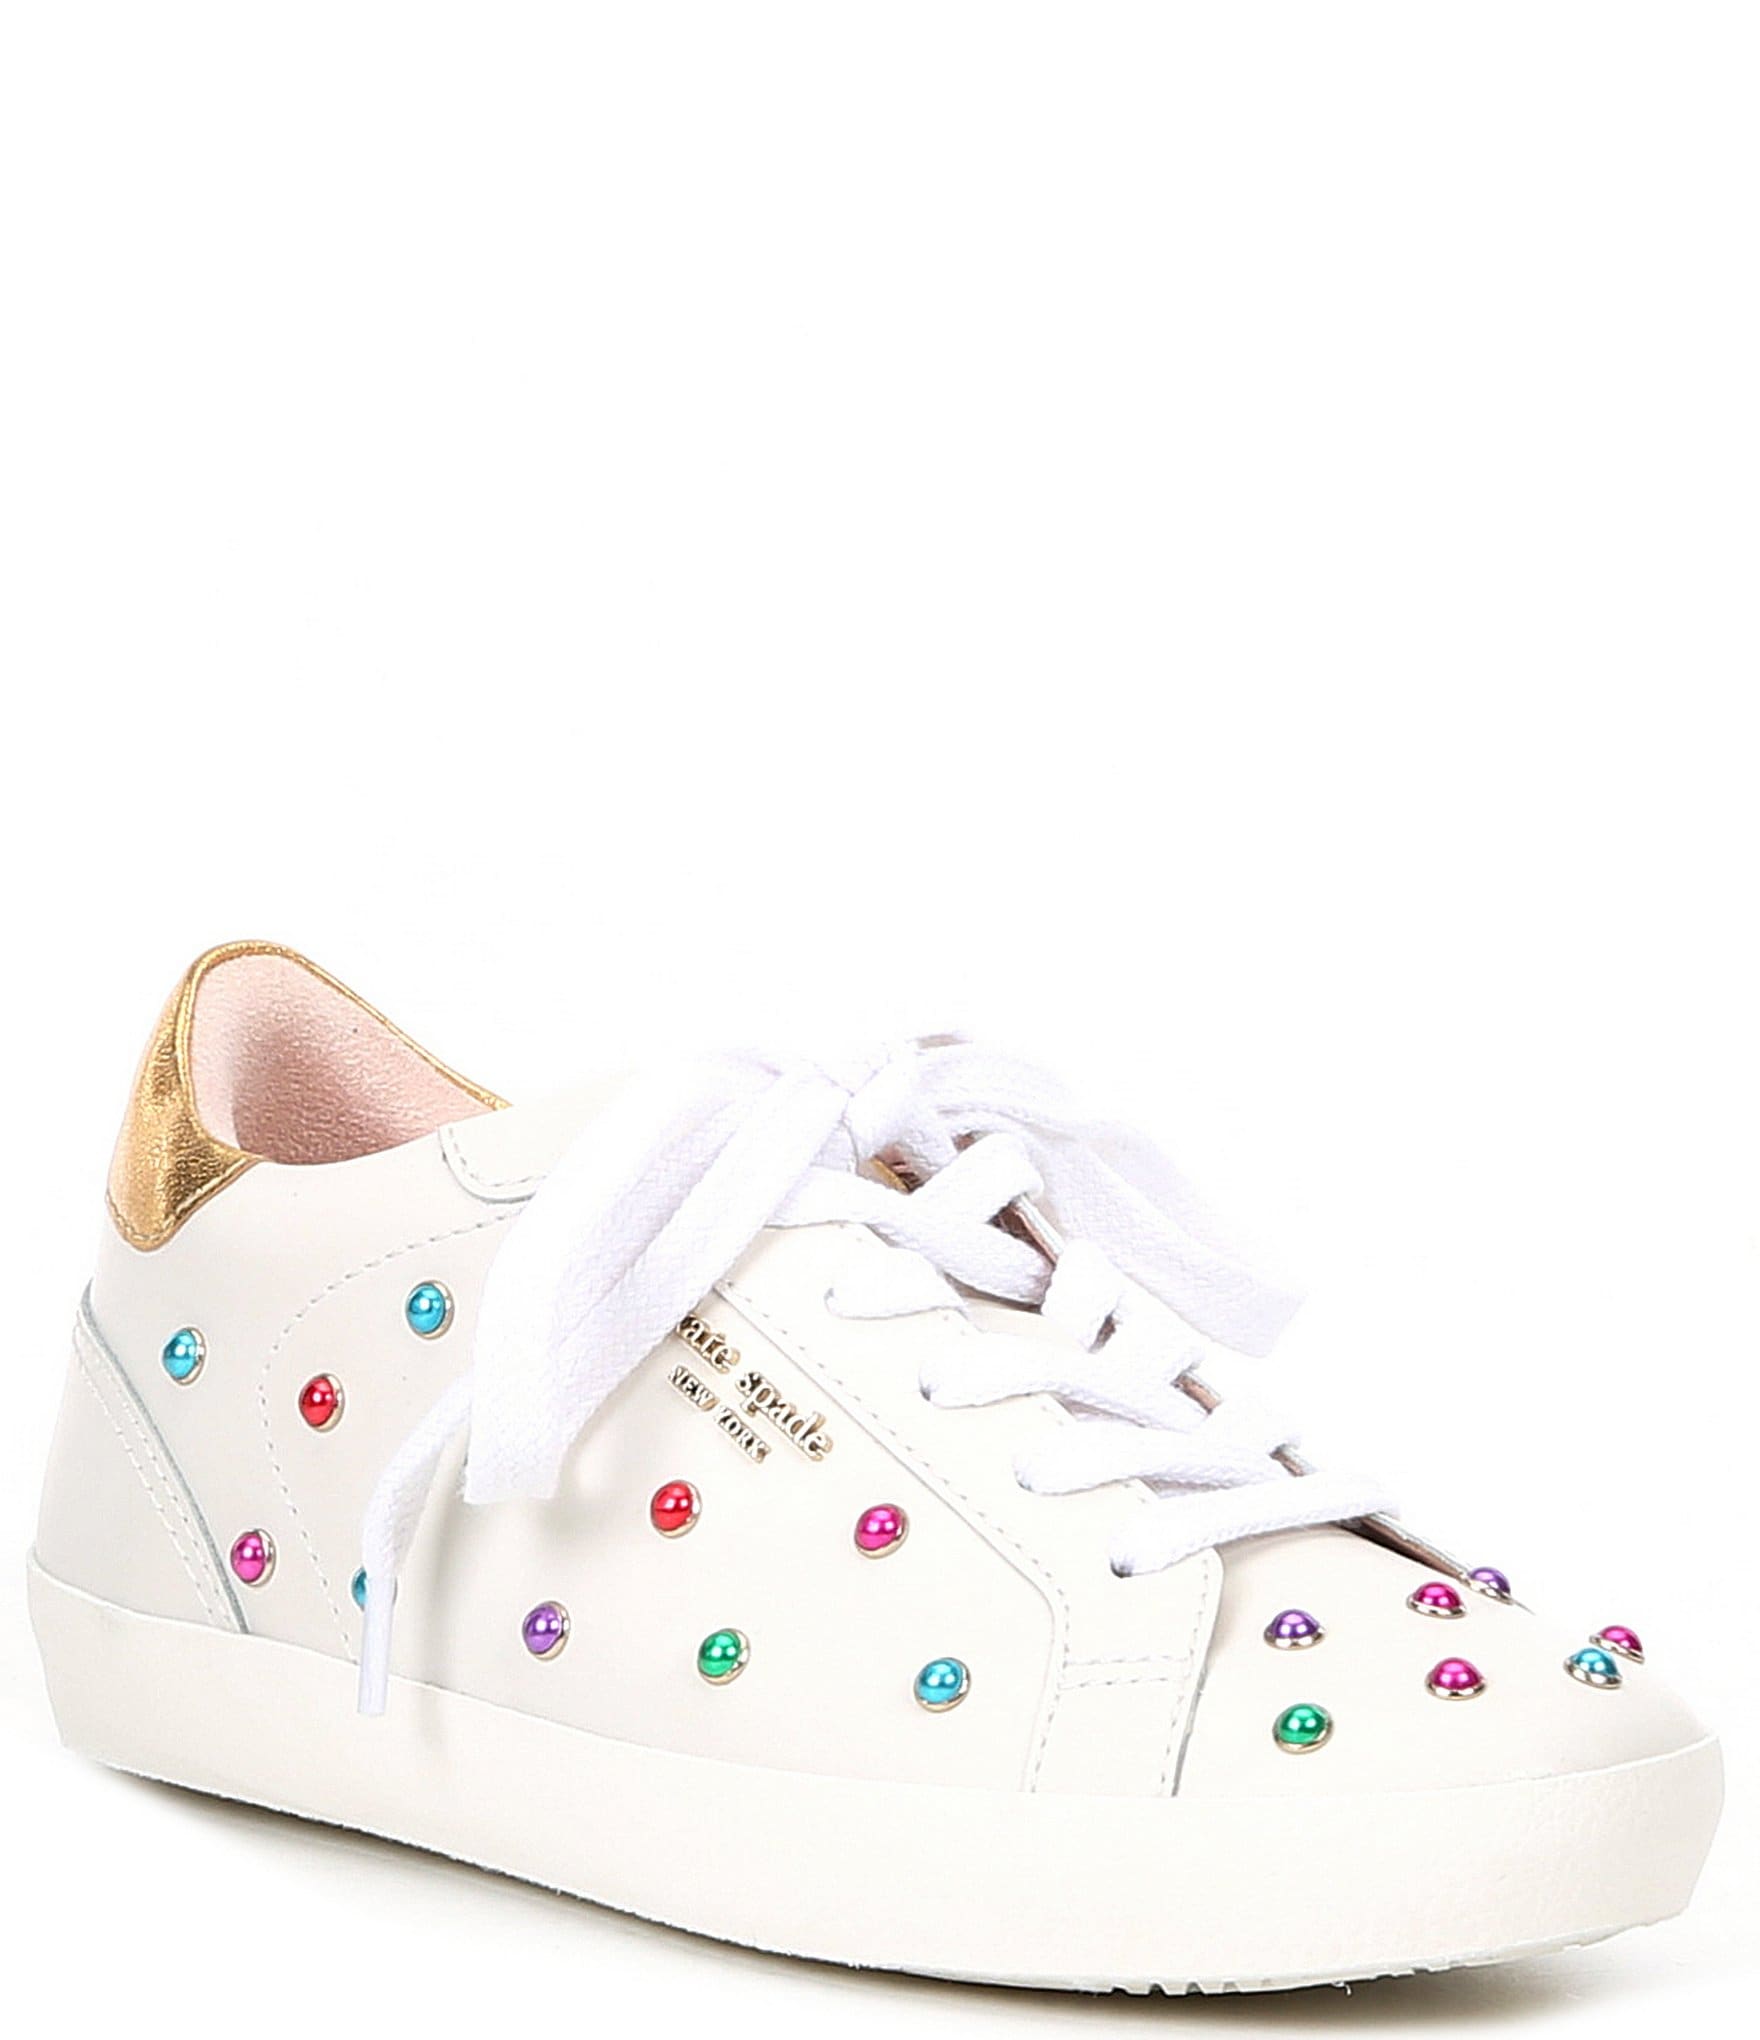 kate spade new york Ace Gem Embellished Lace-Up Sneakers | Dillard's